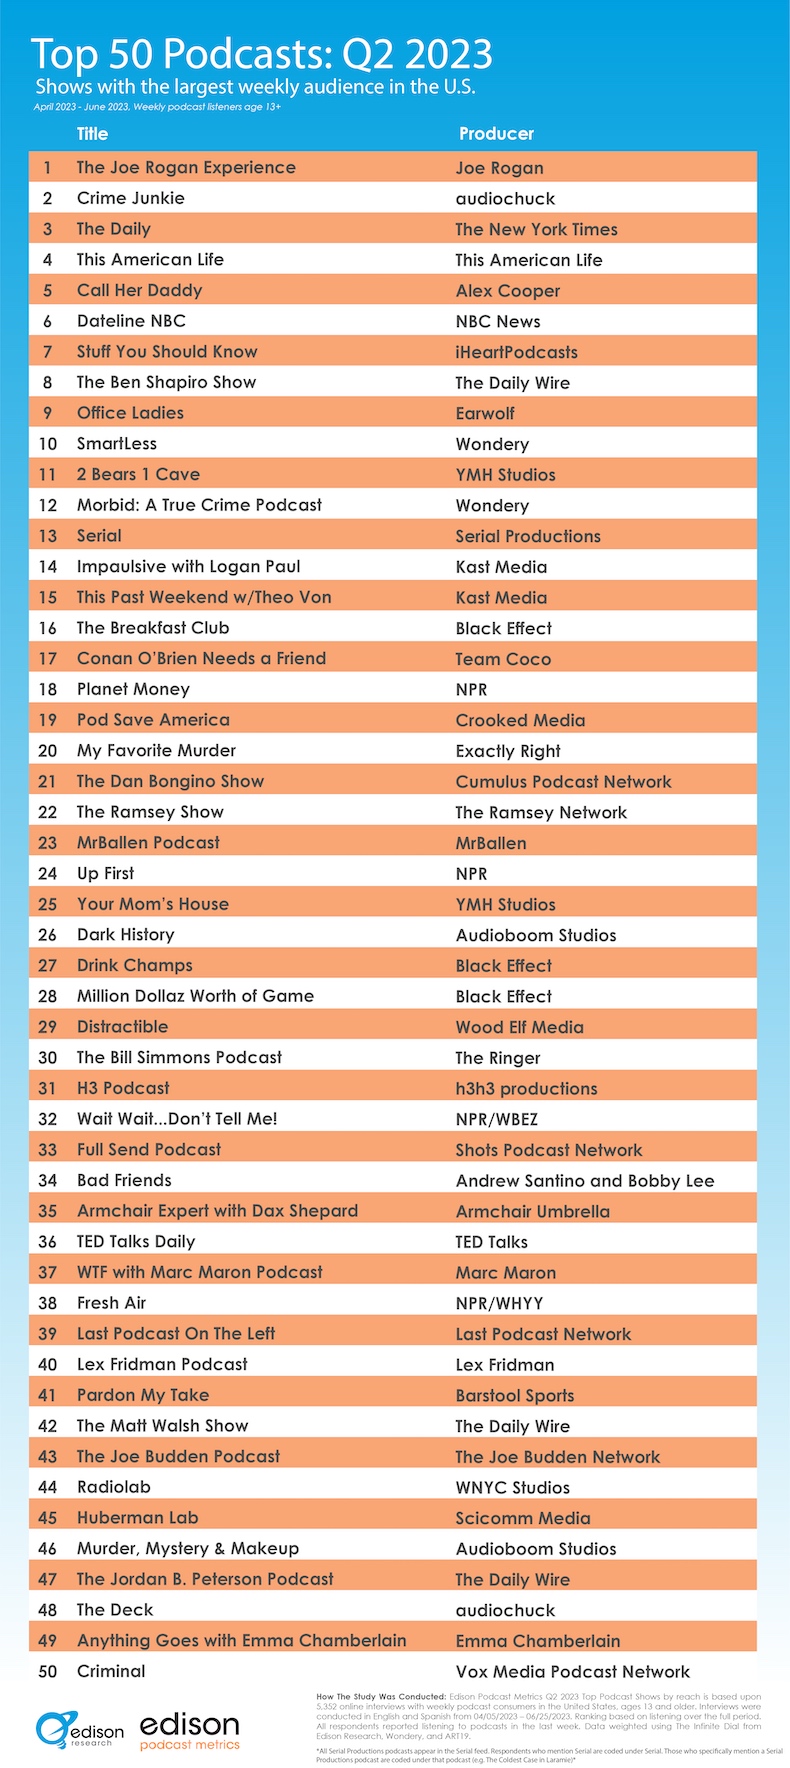 Top 50 podcasts 2023 infographic